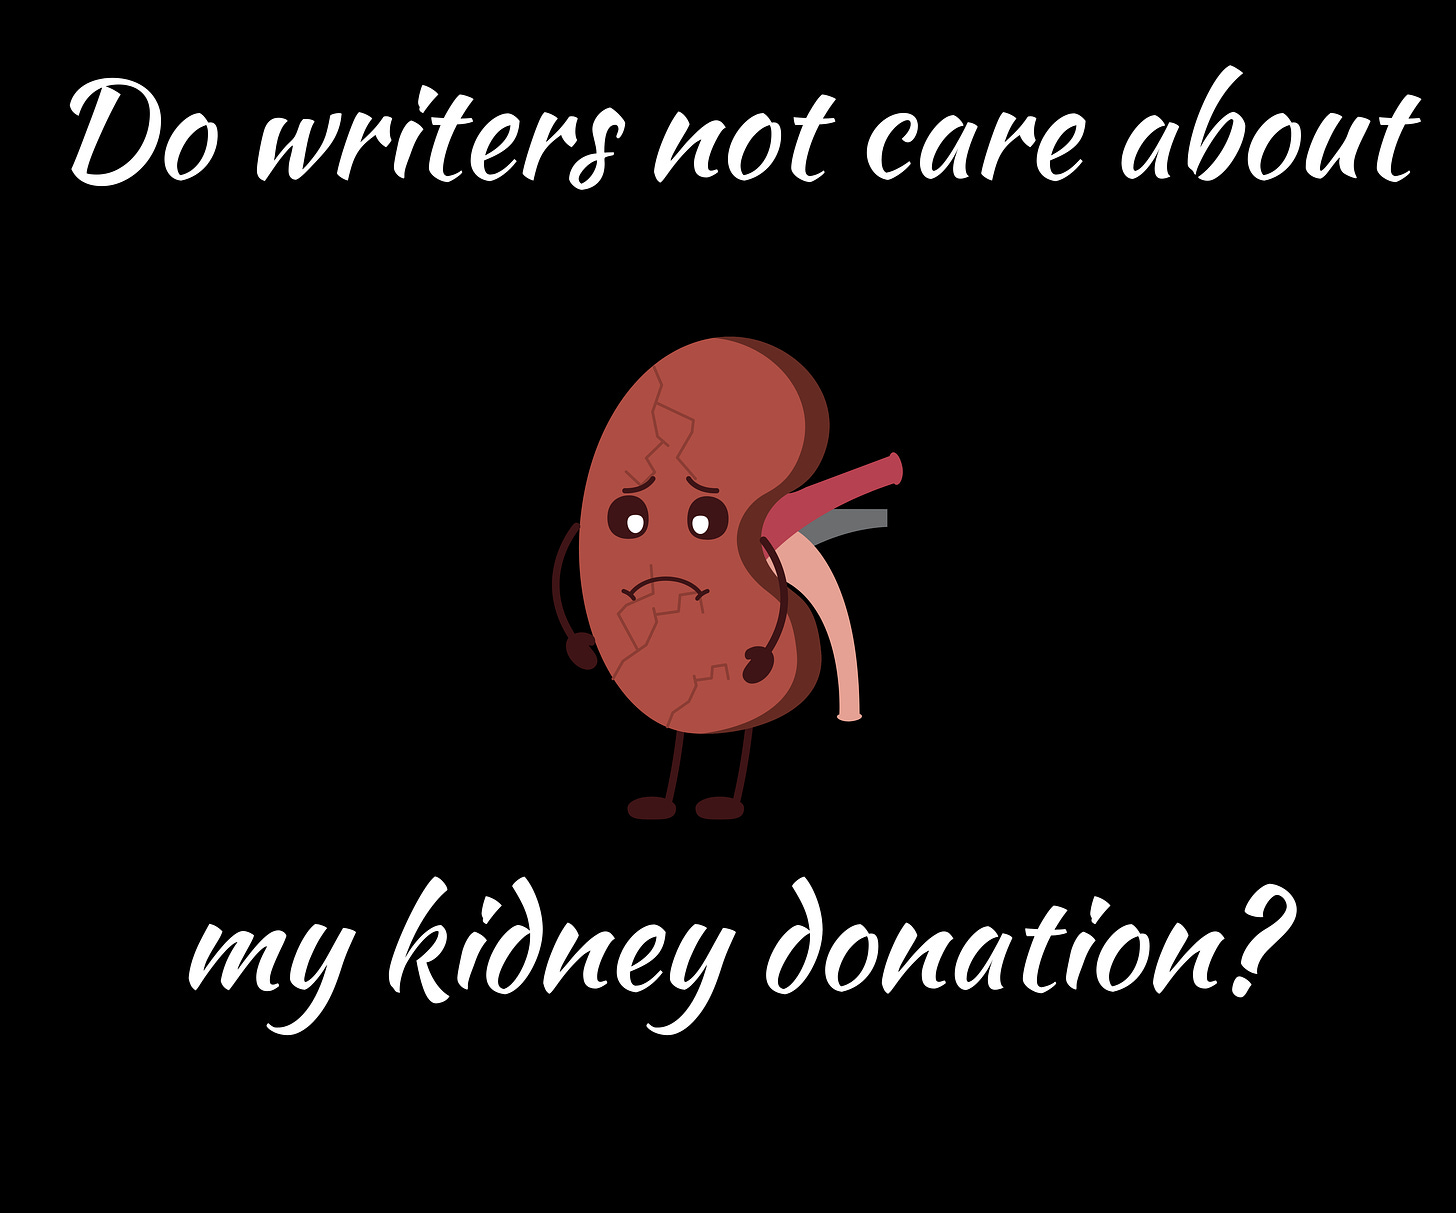 A sad looking cartoon kidney surrounded by the text “Do writers not care about my kidney donation?”